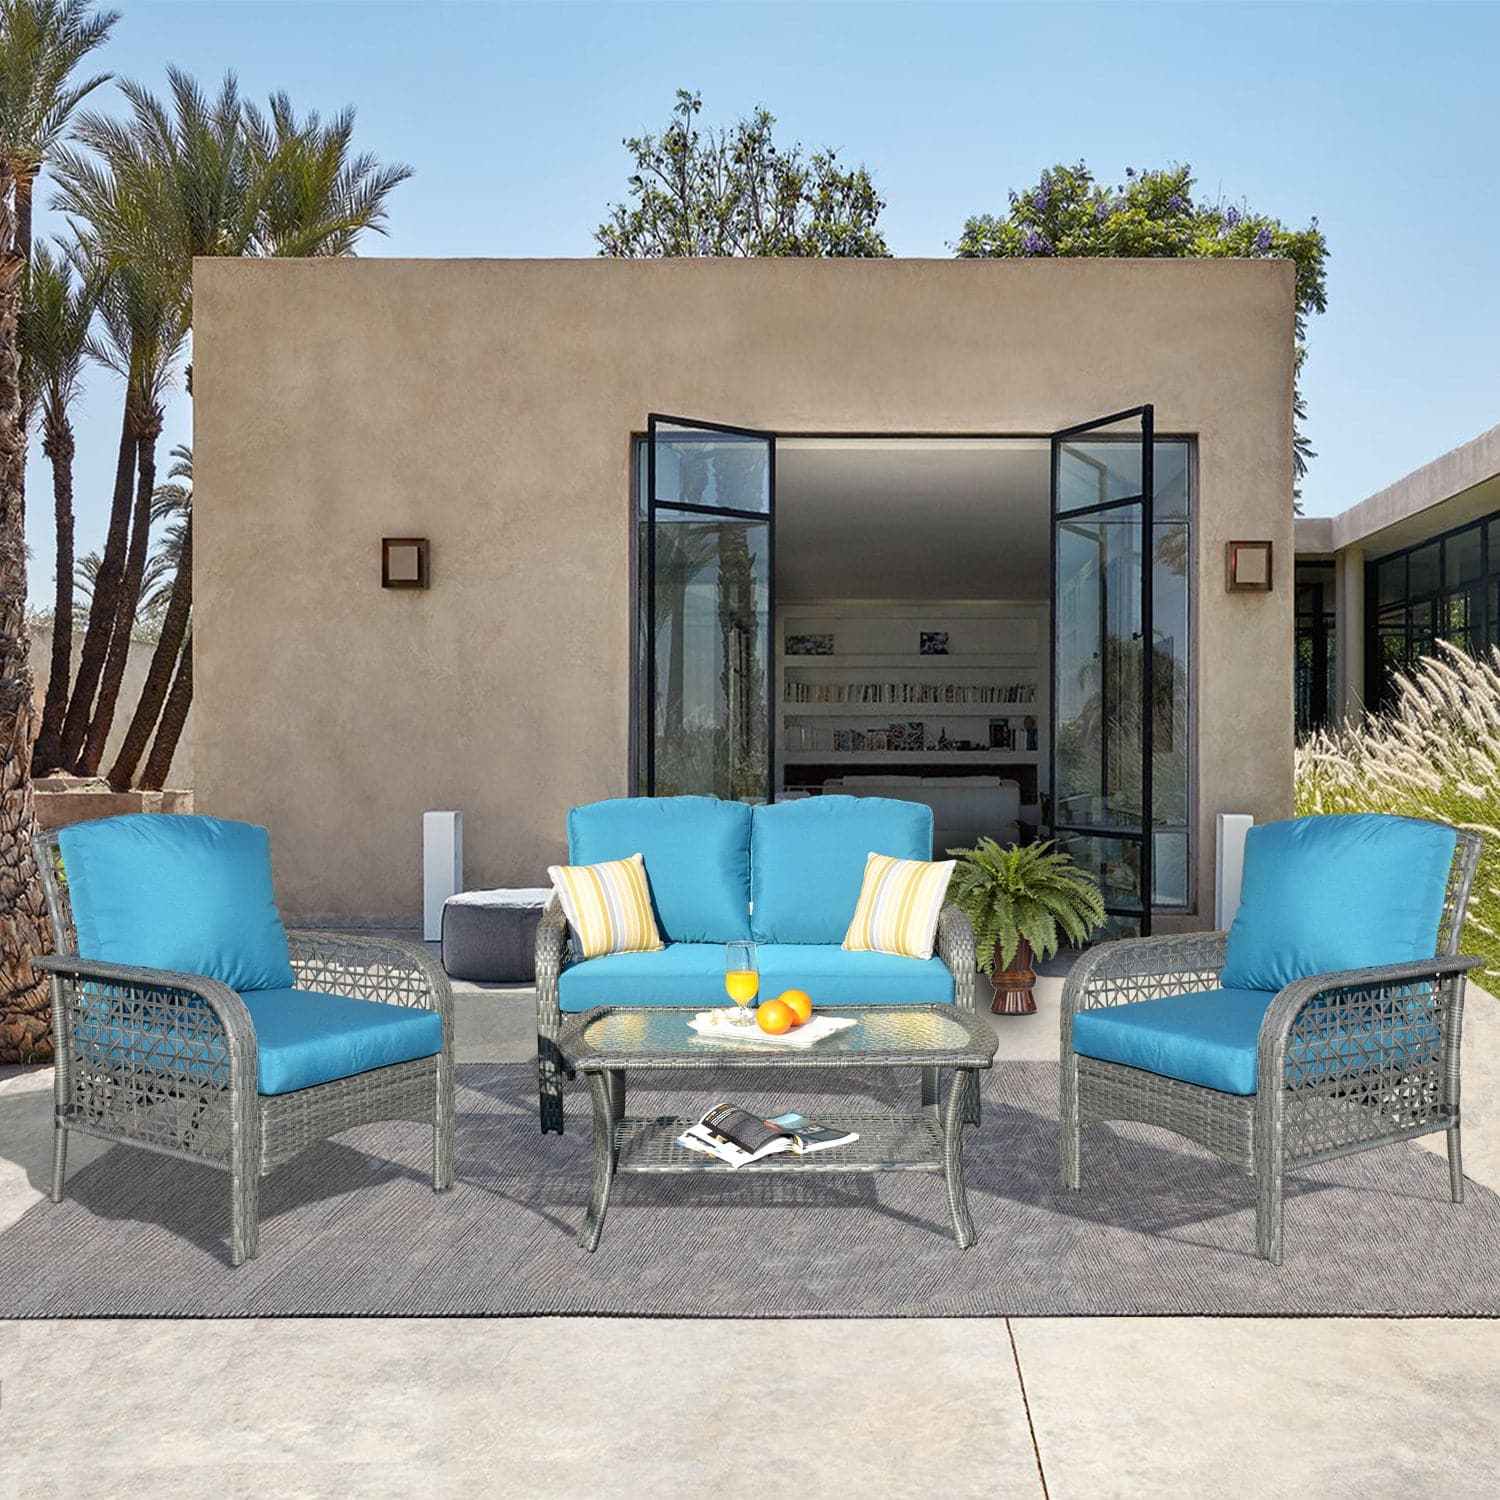 Keep Your Cool: Why PE Wicker Is the Coolest Outdoor Furniture